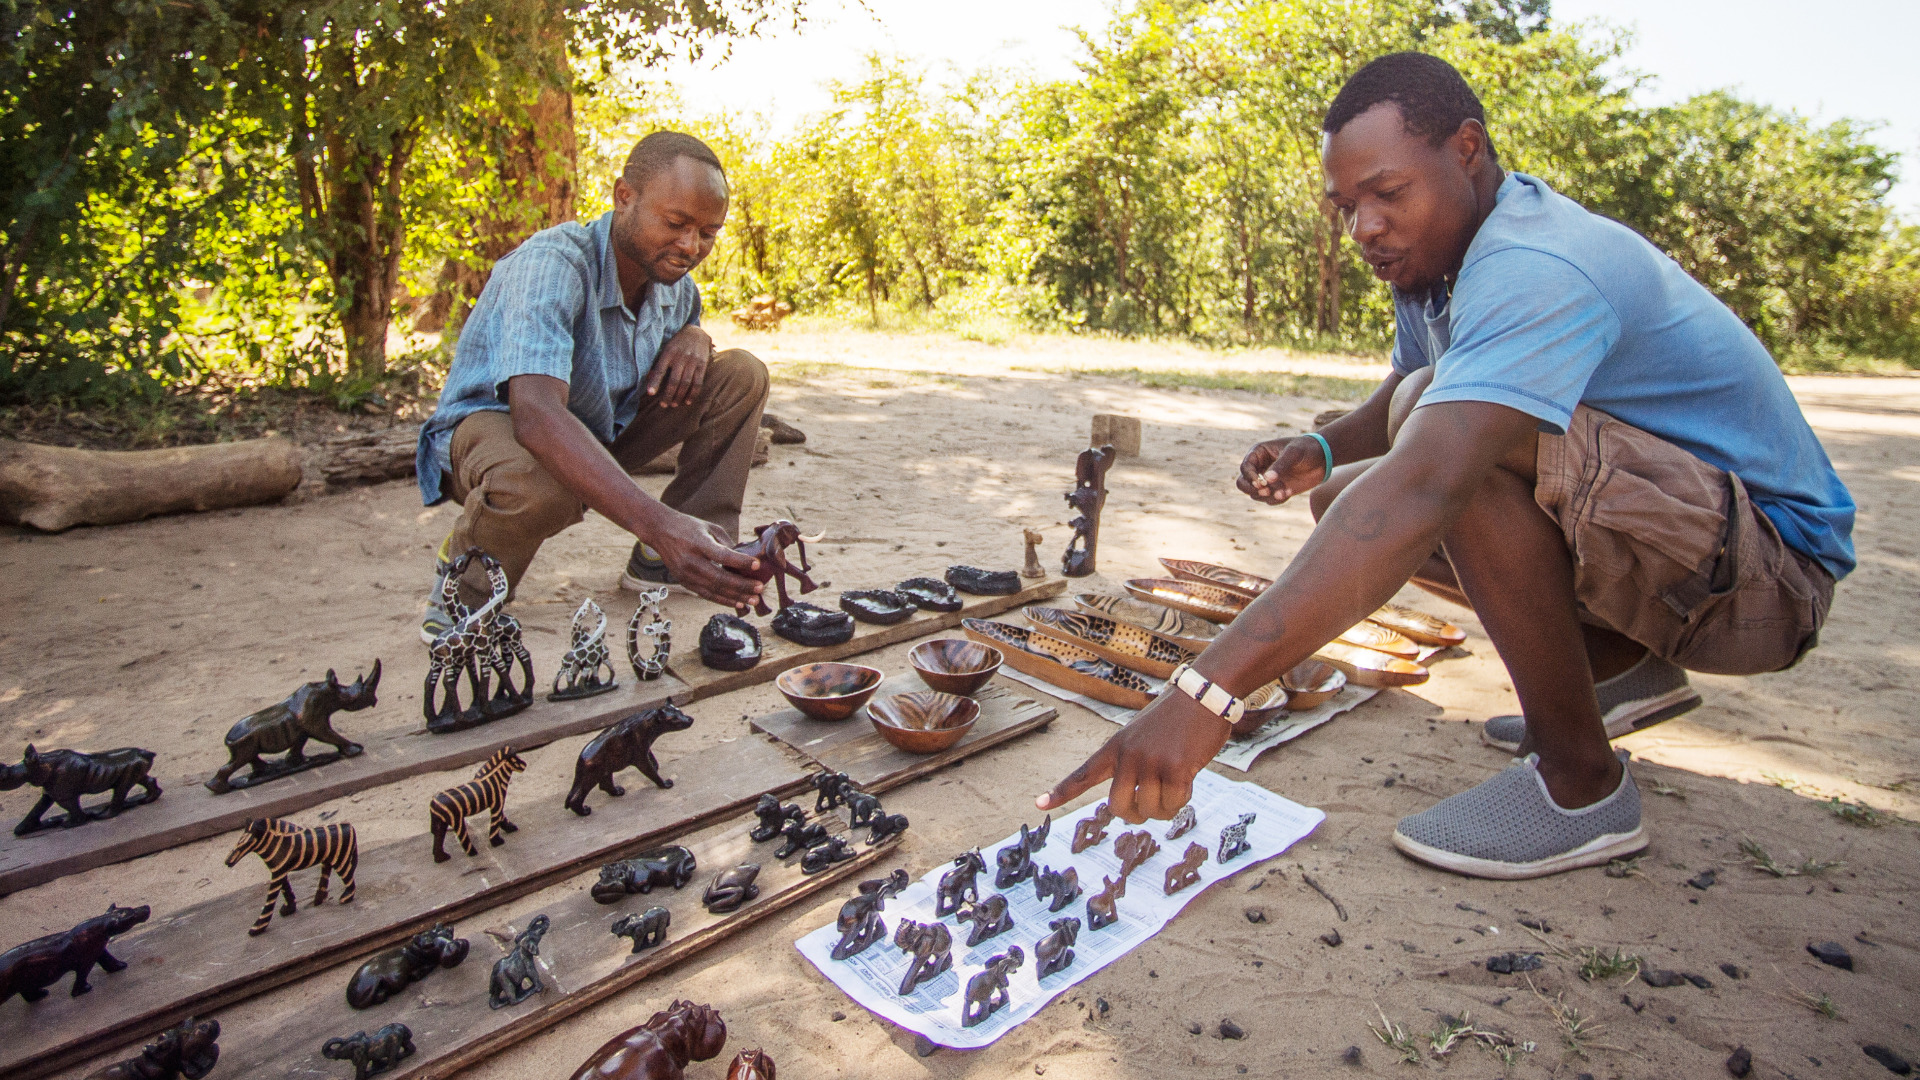 Curio traders in Malawi